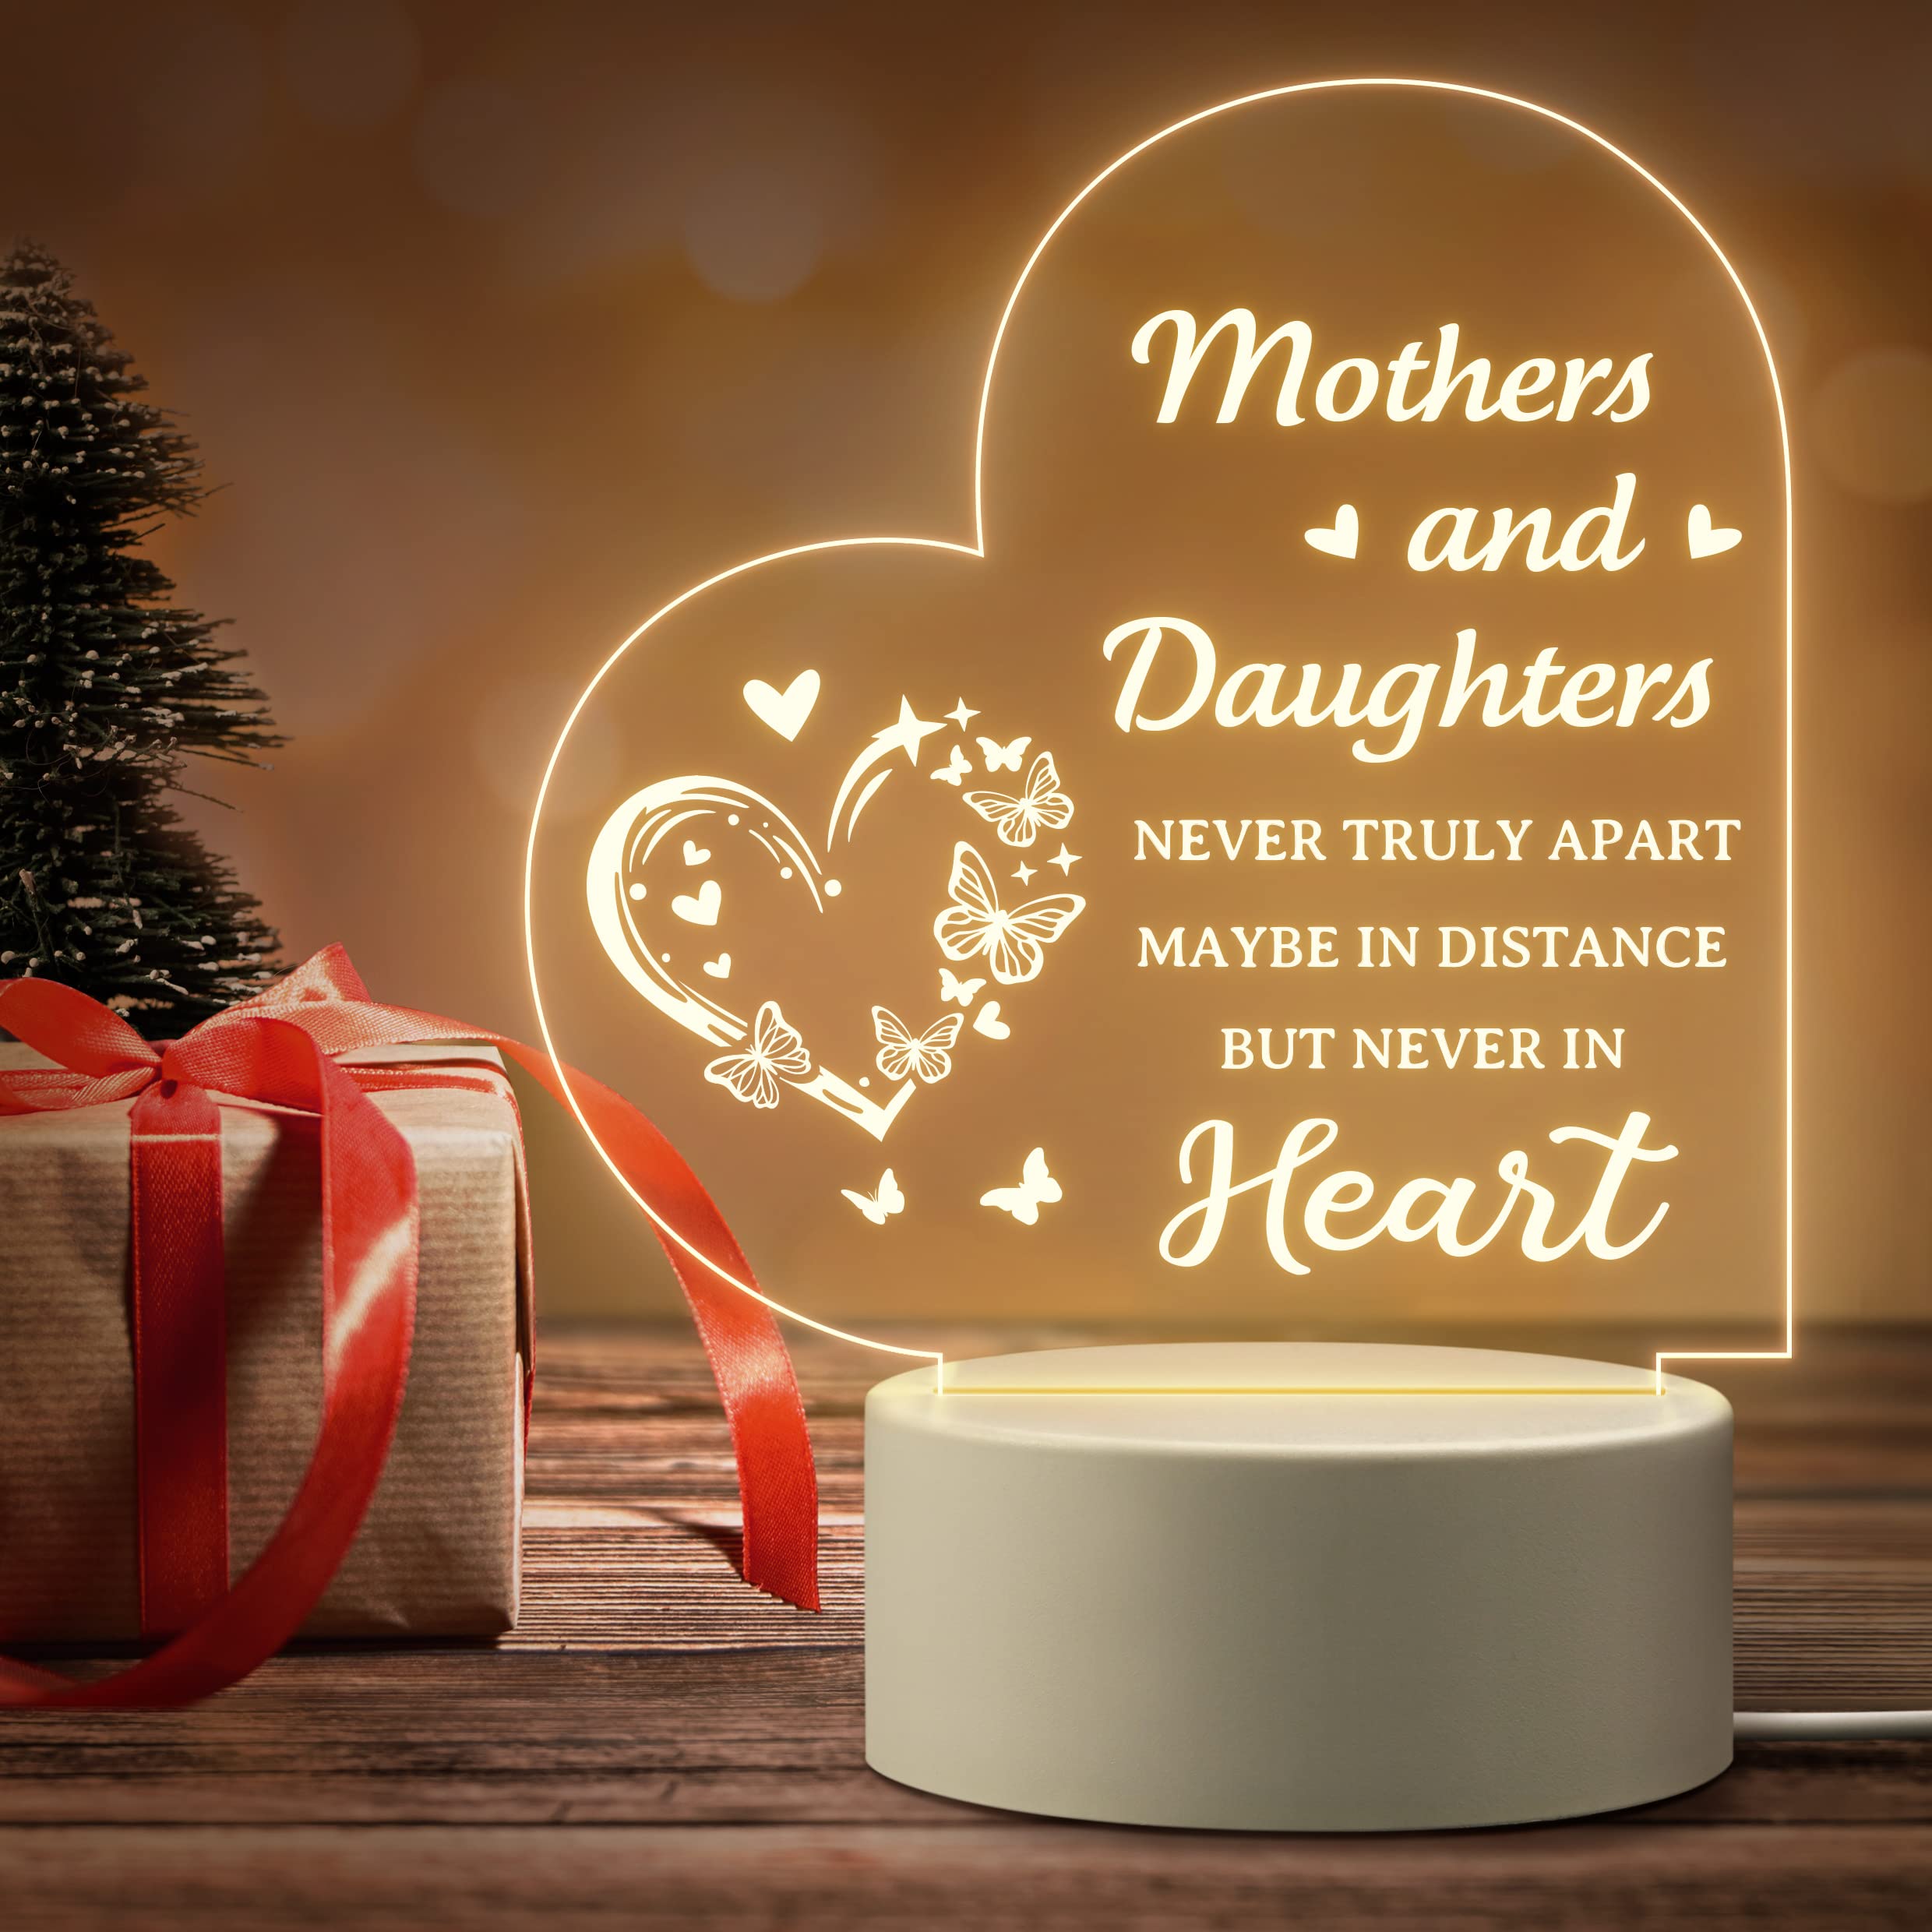 Mothers Day Gifts for Mom, Mom Birthday Gifts, Mothers Day Gifts for Mom  from Daughter, Birthday Gifts for Mom, Mom Christmas Gifts from Daughters